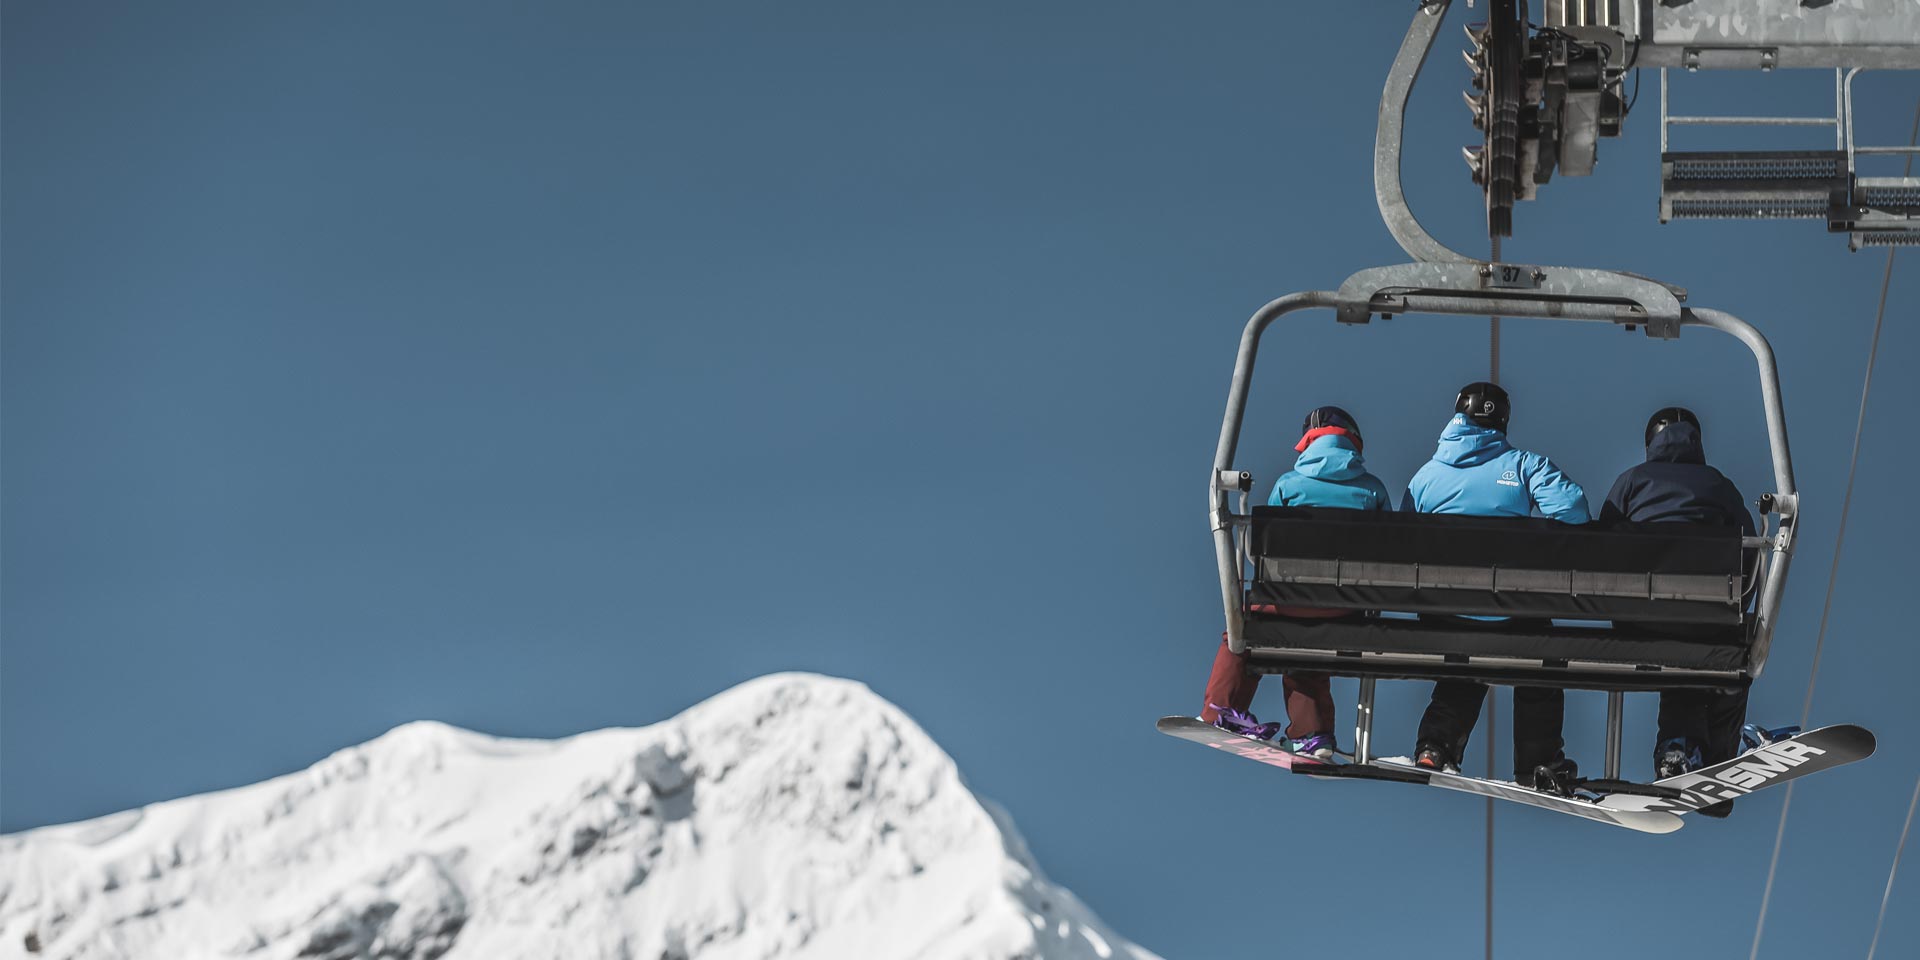 snowboarders-on-chairlift.jpg